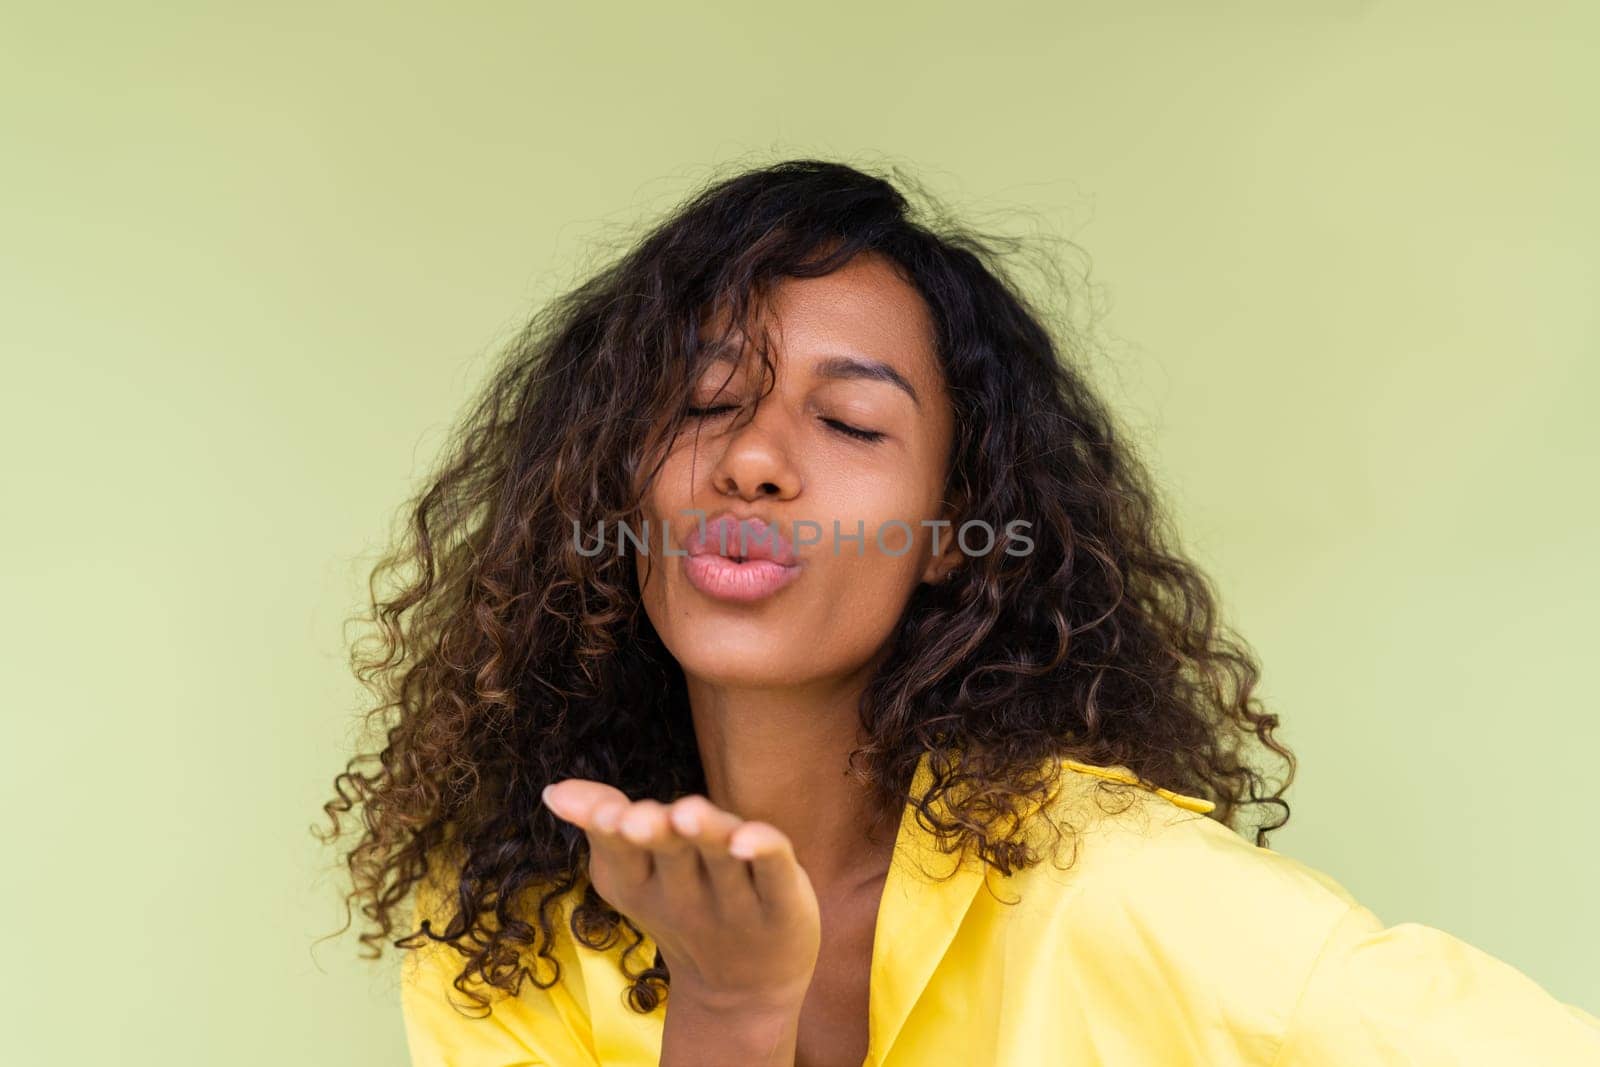 Beautiful african american woman in casual shirt on green background positive smiling laughing enjoying execited